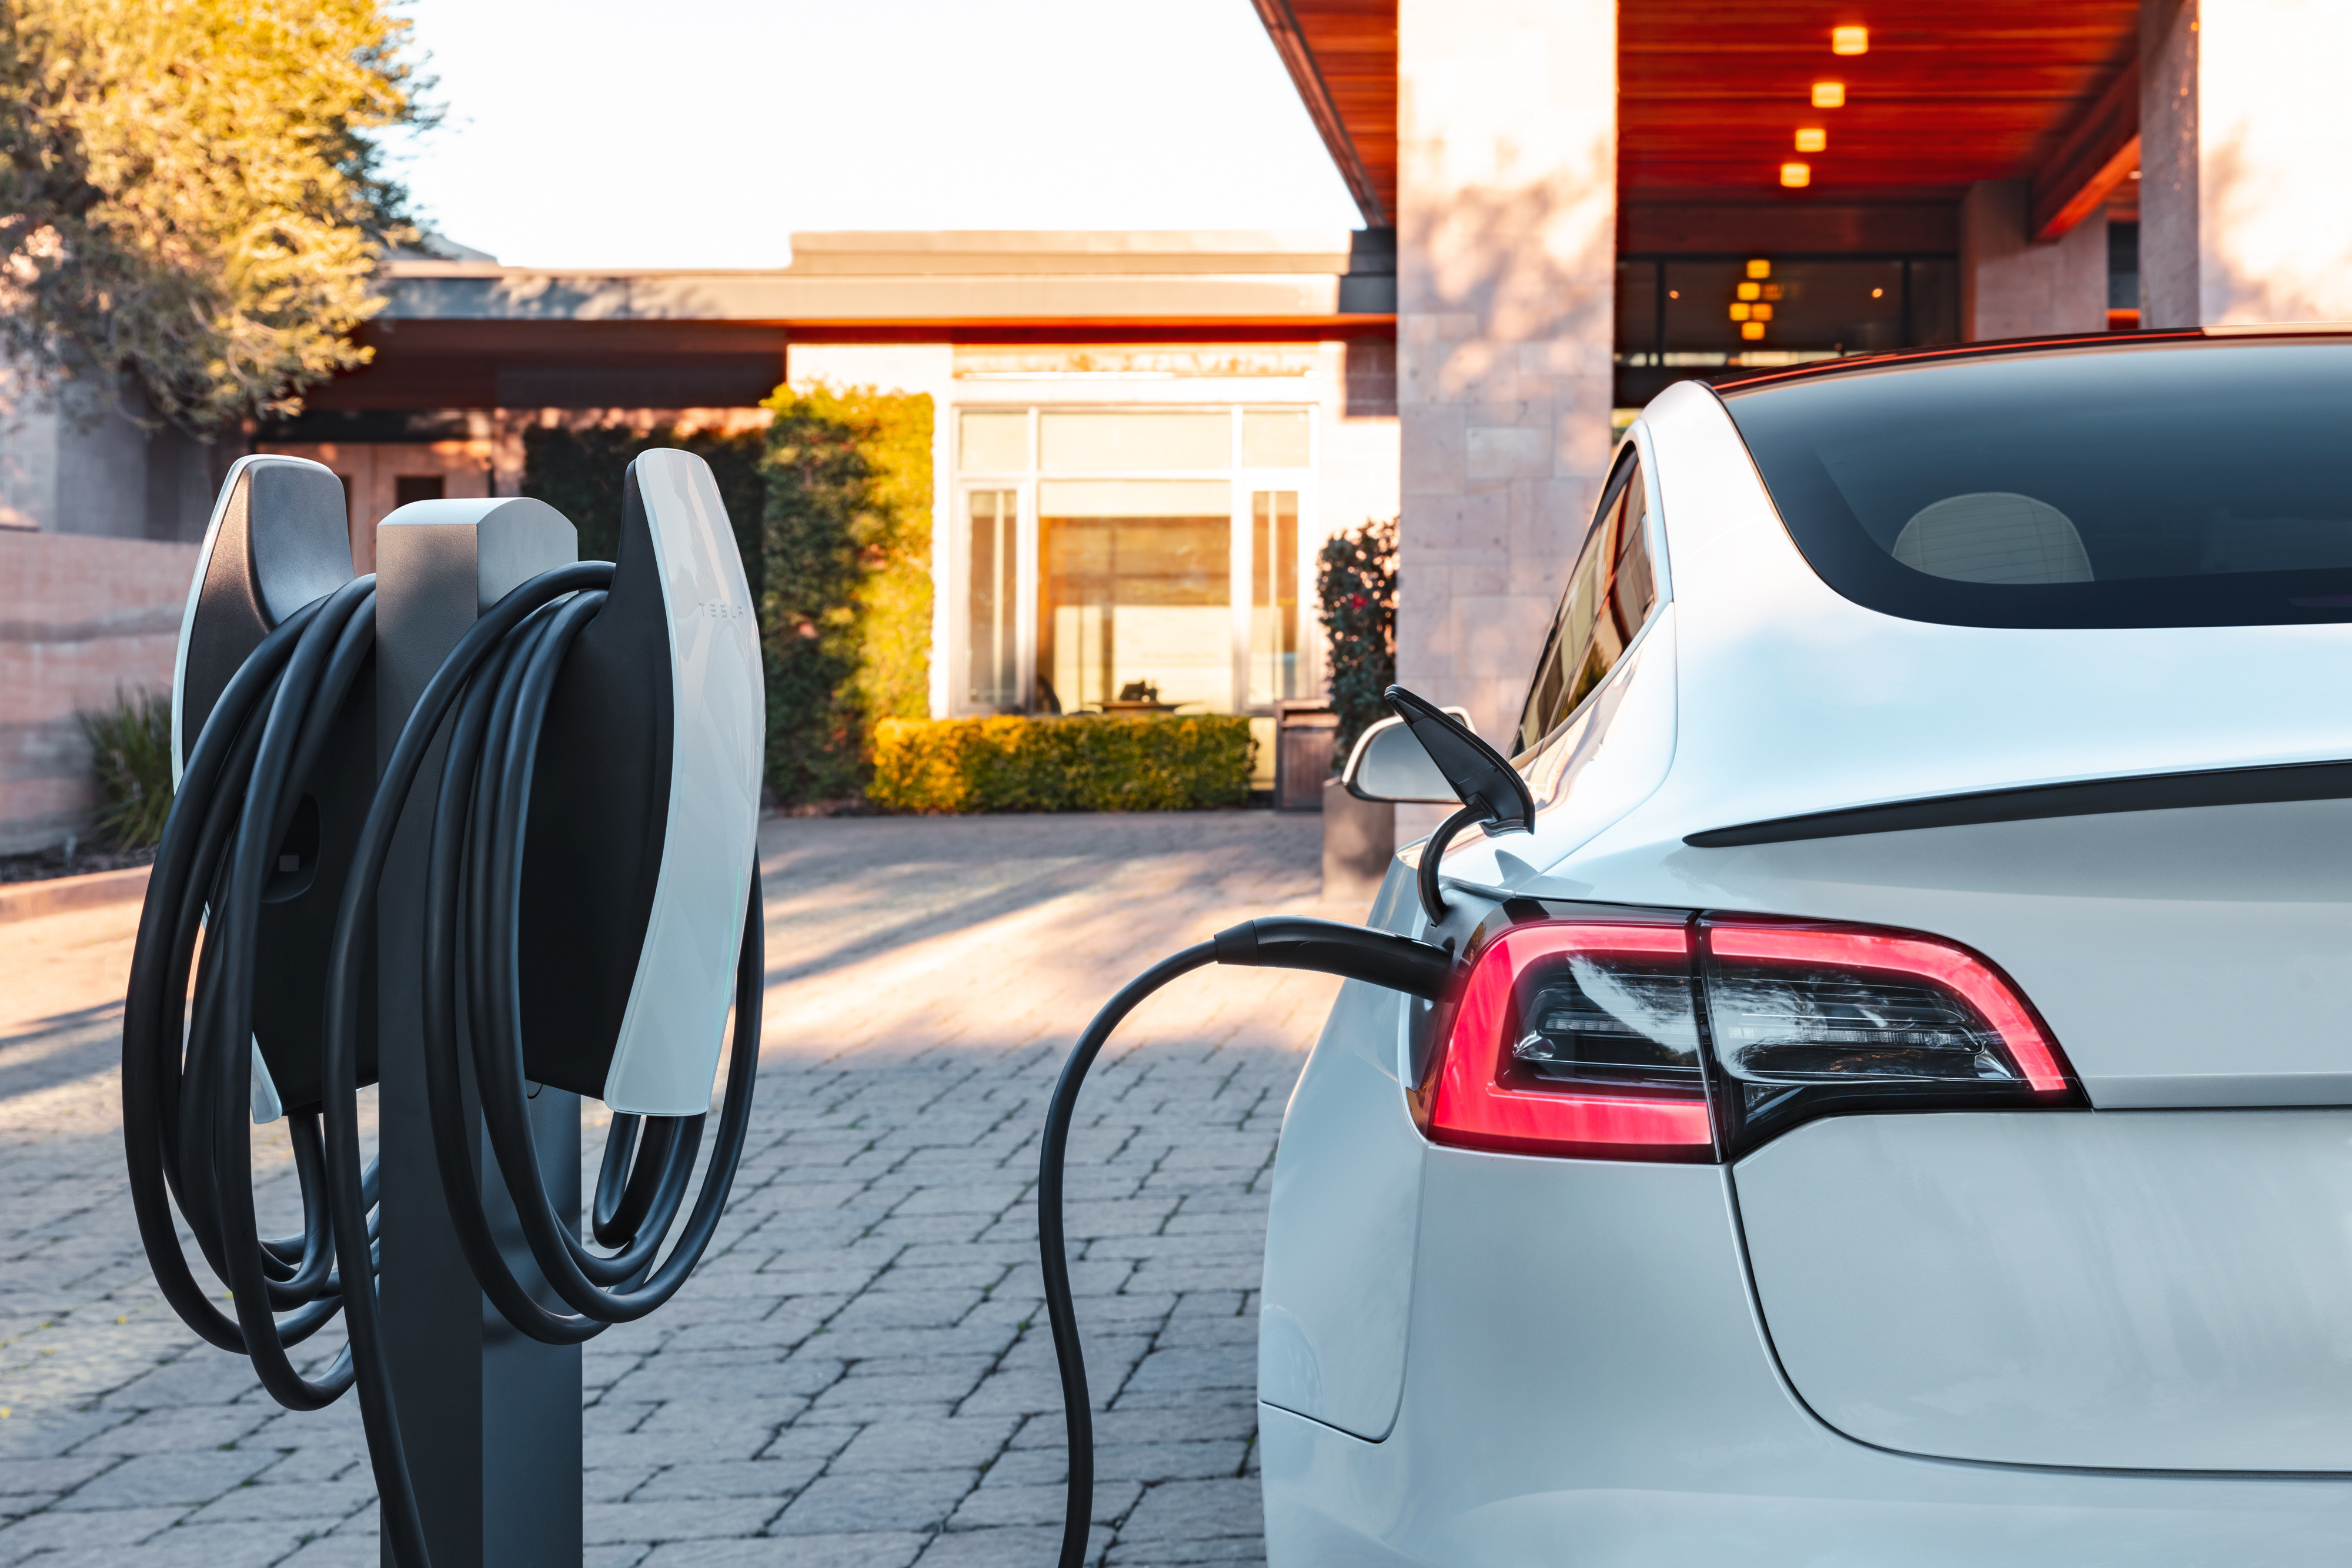 How to Install Your Own Level 2 EV Charging Station at Home